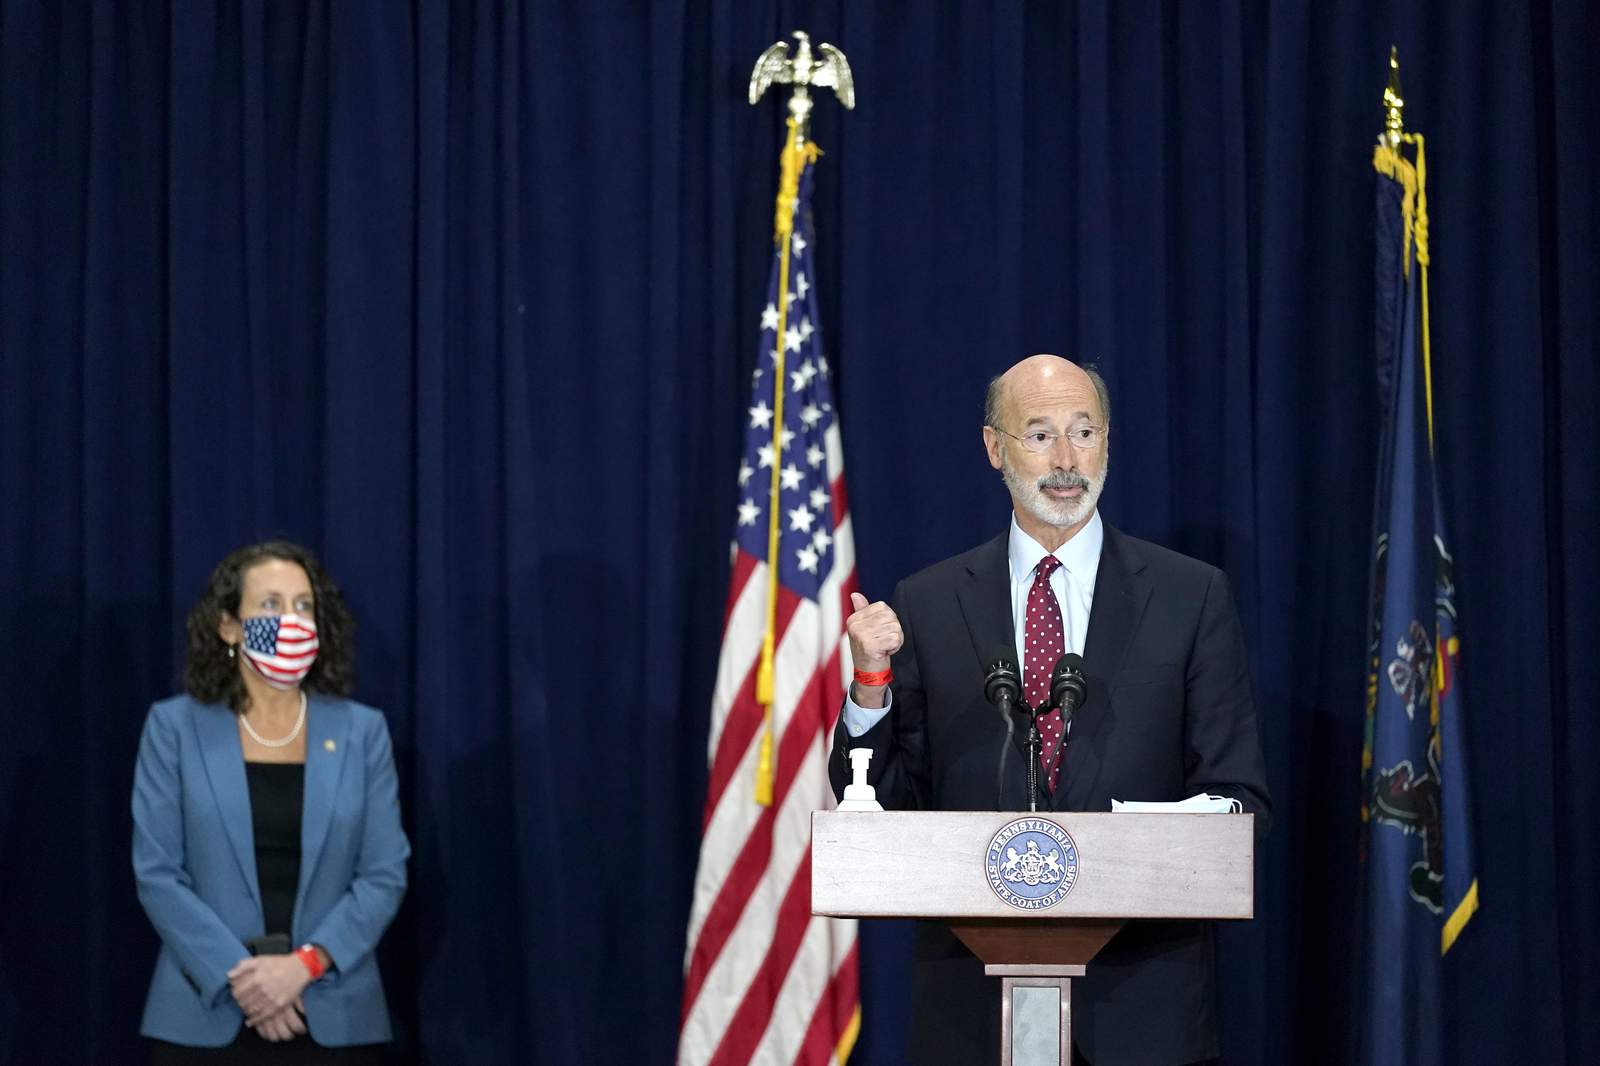 Pennsylvania governor says he's tested positive for COVID-19